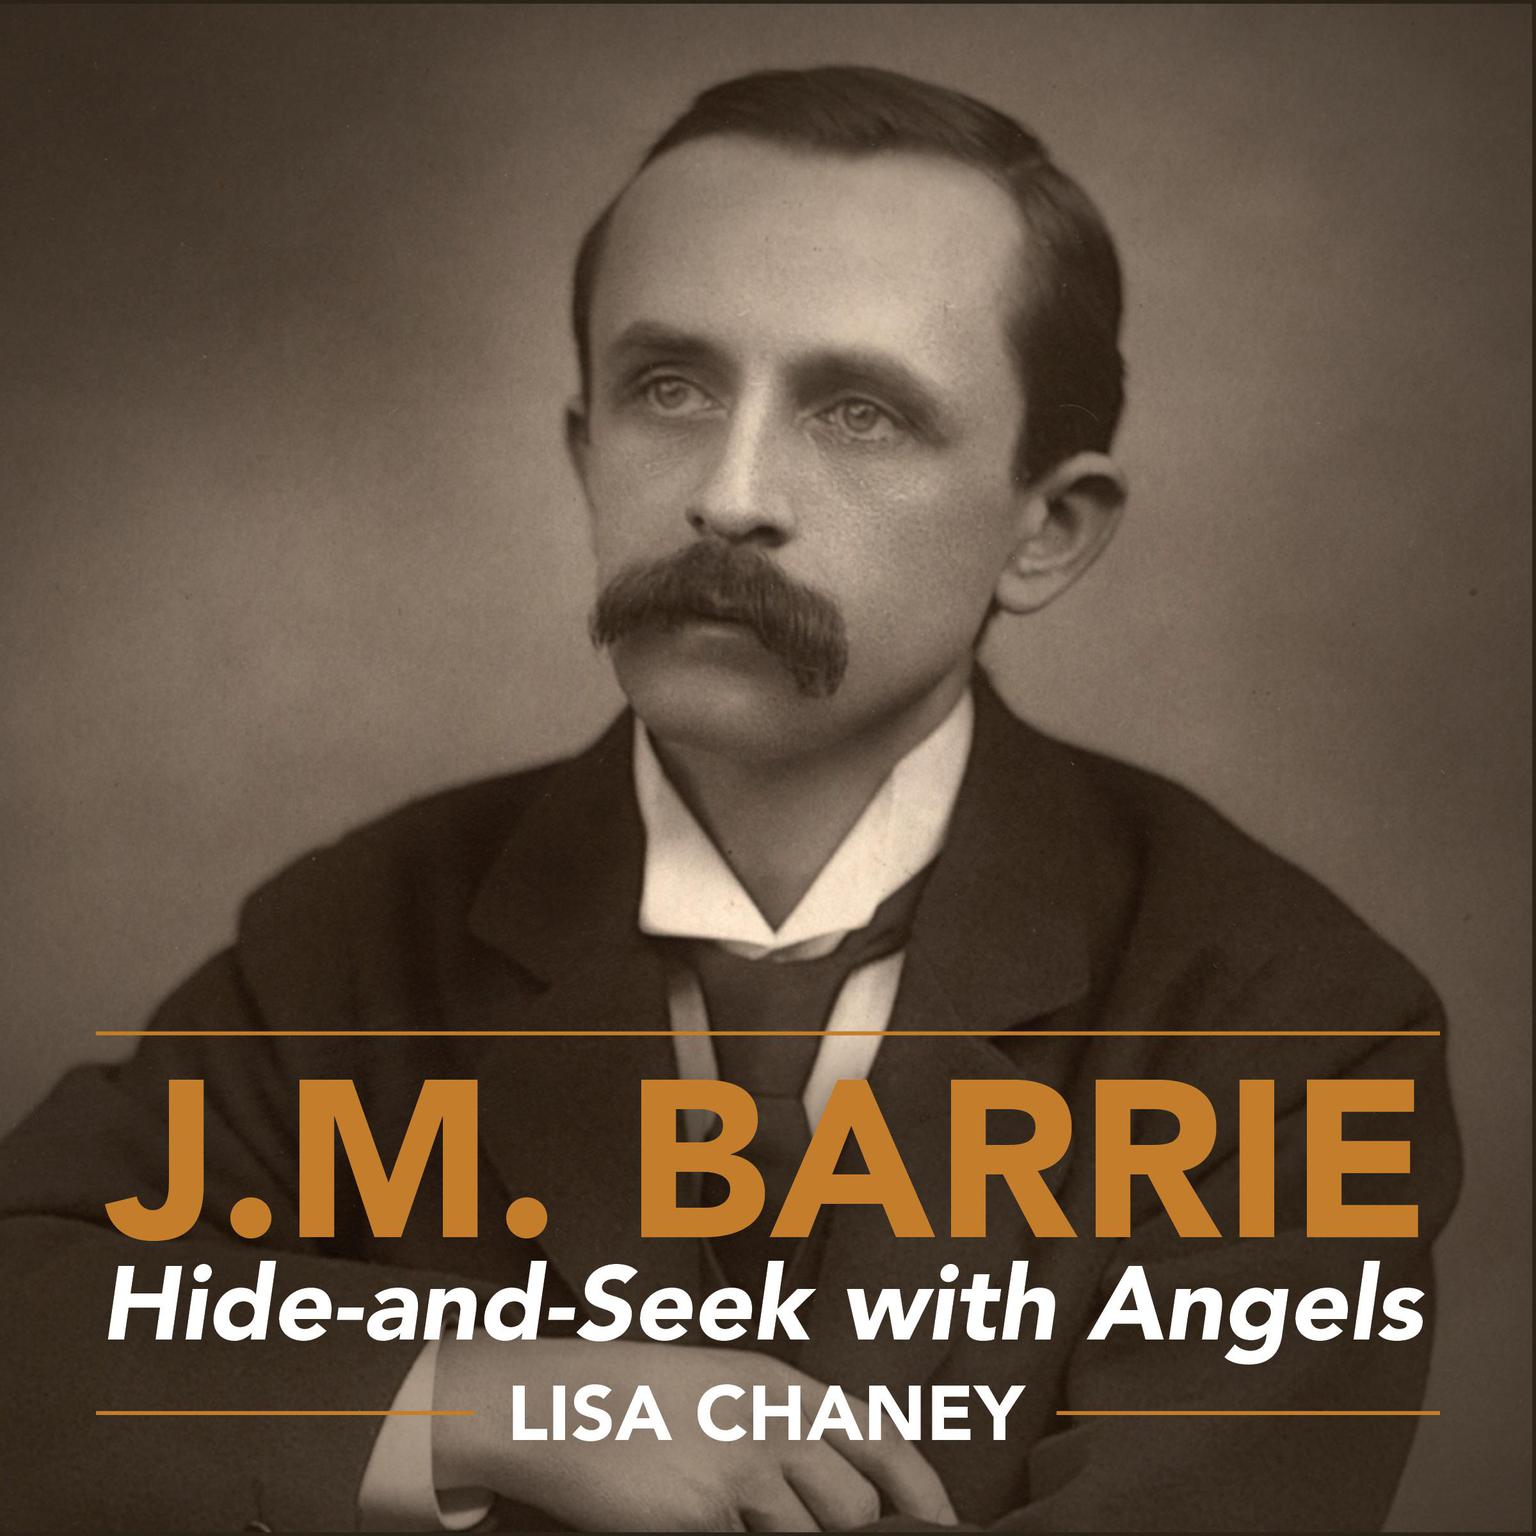 Hide-and-Seek with Angels: A Life of J.M. Barrie Audiobook, by Lisa Chaney